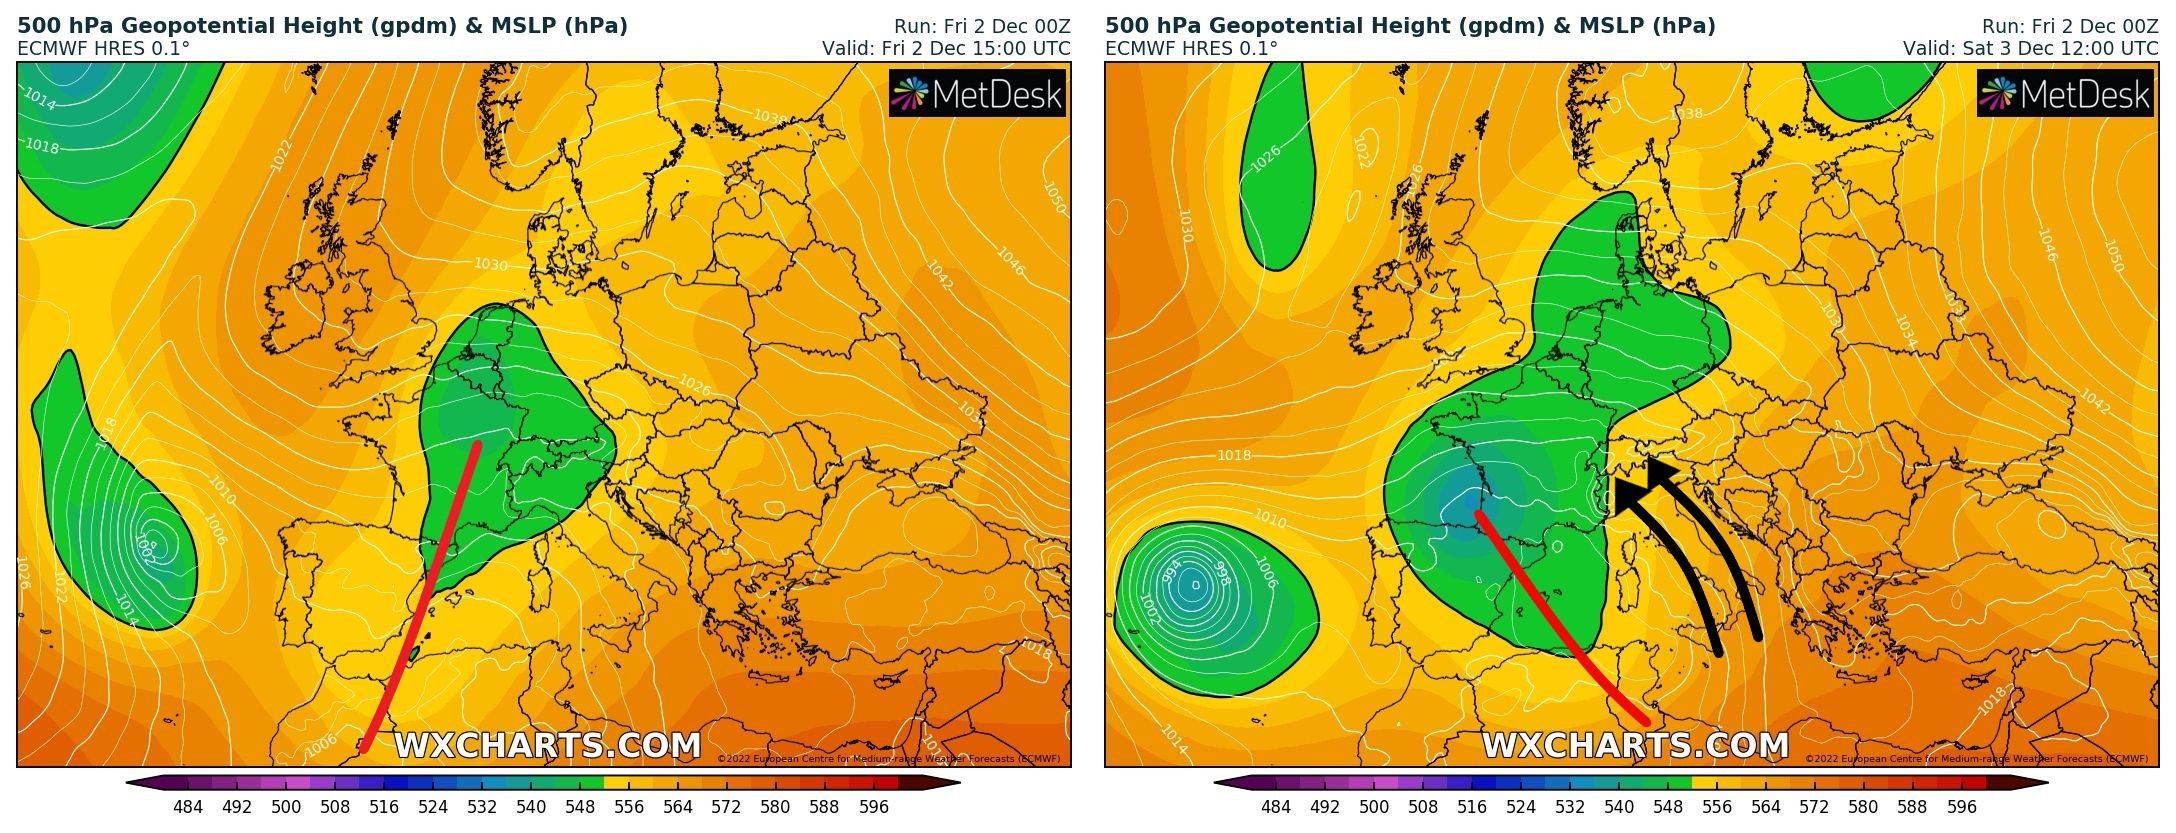 Trough axis tilts and causes a southeasterly flow towards the Alps (wxcharts.com)